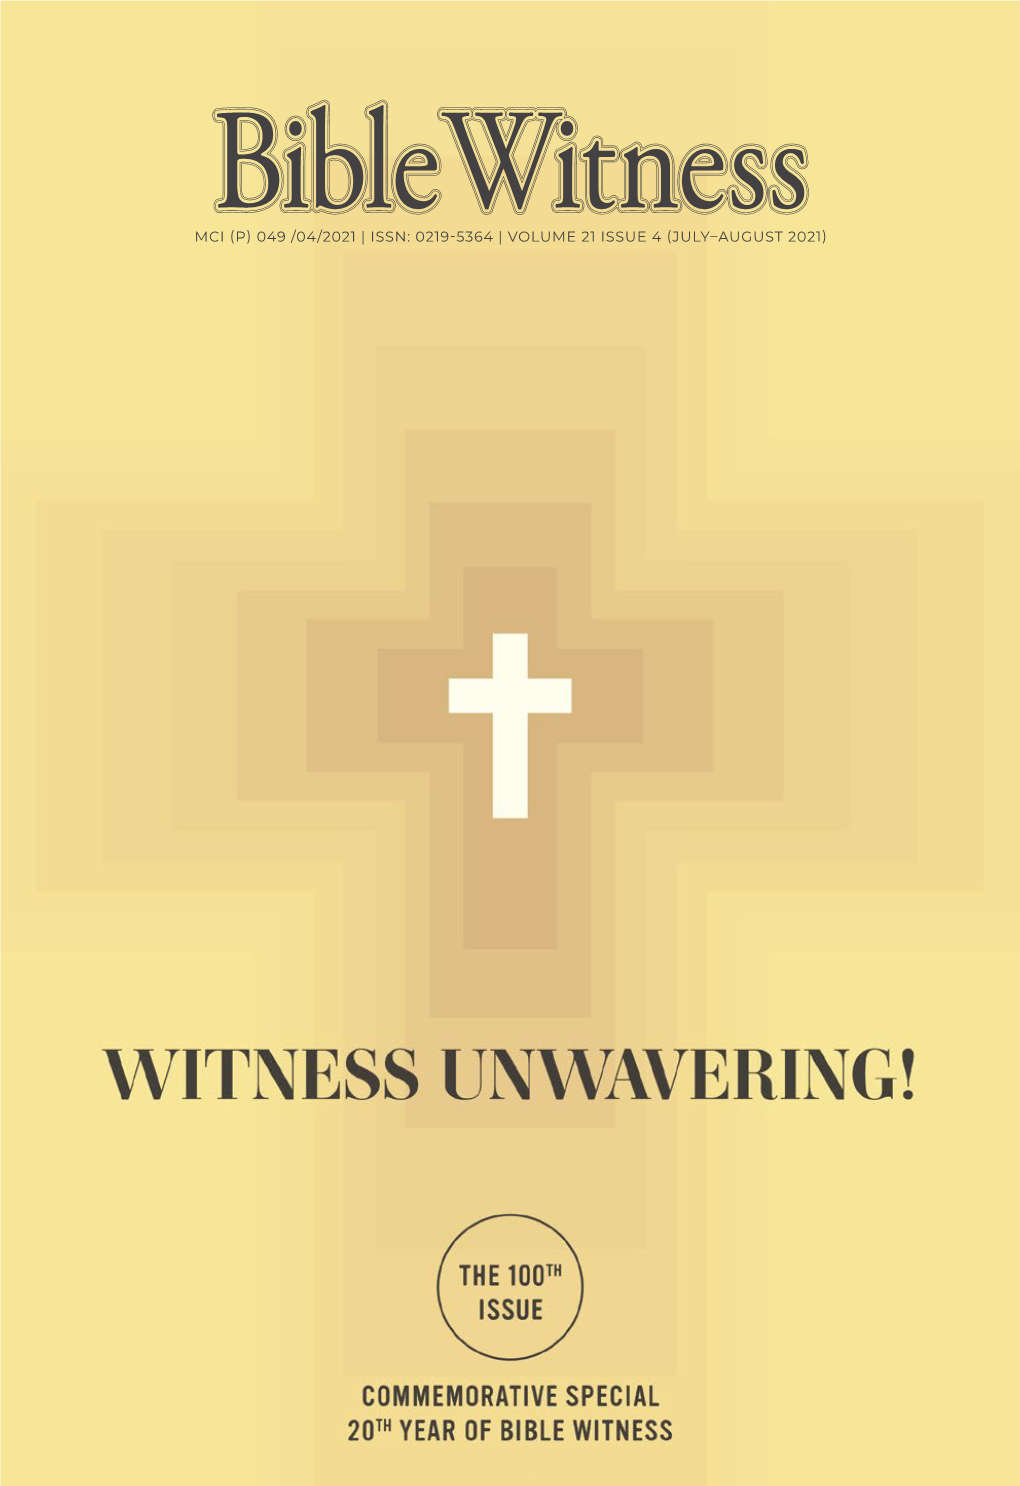 Mci (P) 049 /04/2021 | Issn: 0219-5364 | Volume 21 Issue 4 (July–August 2021) Witness Unwavering! (Commemorative Special) | July–August 2021